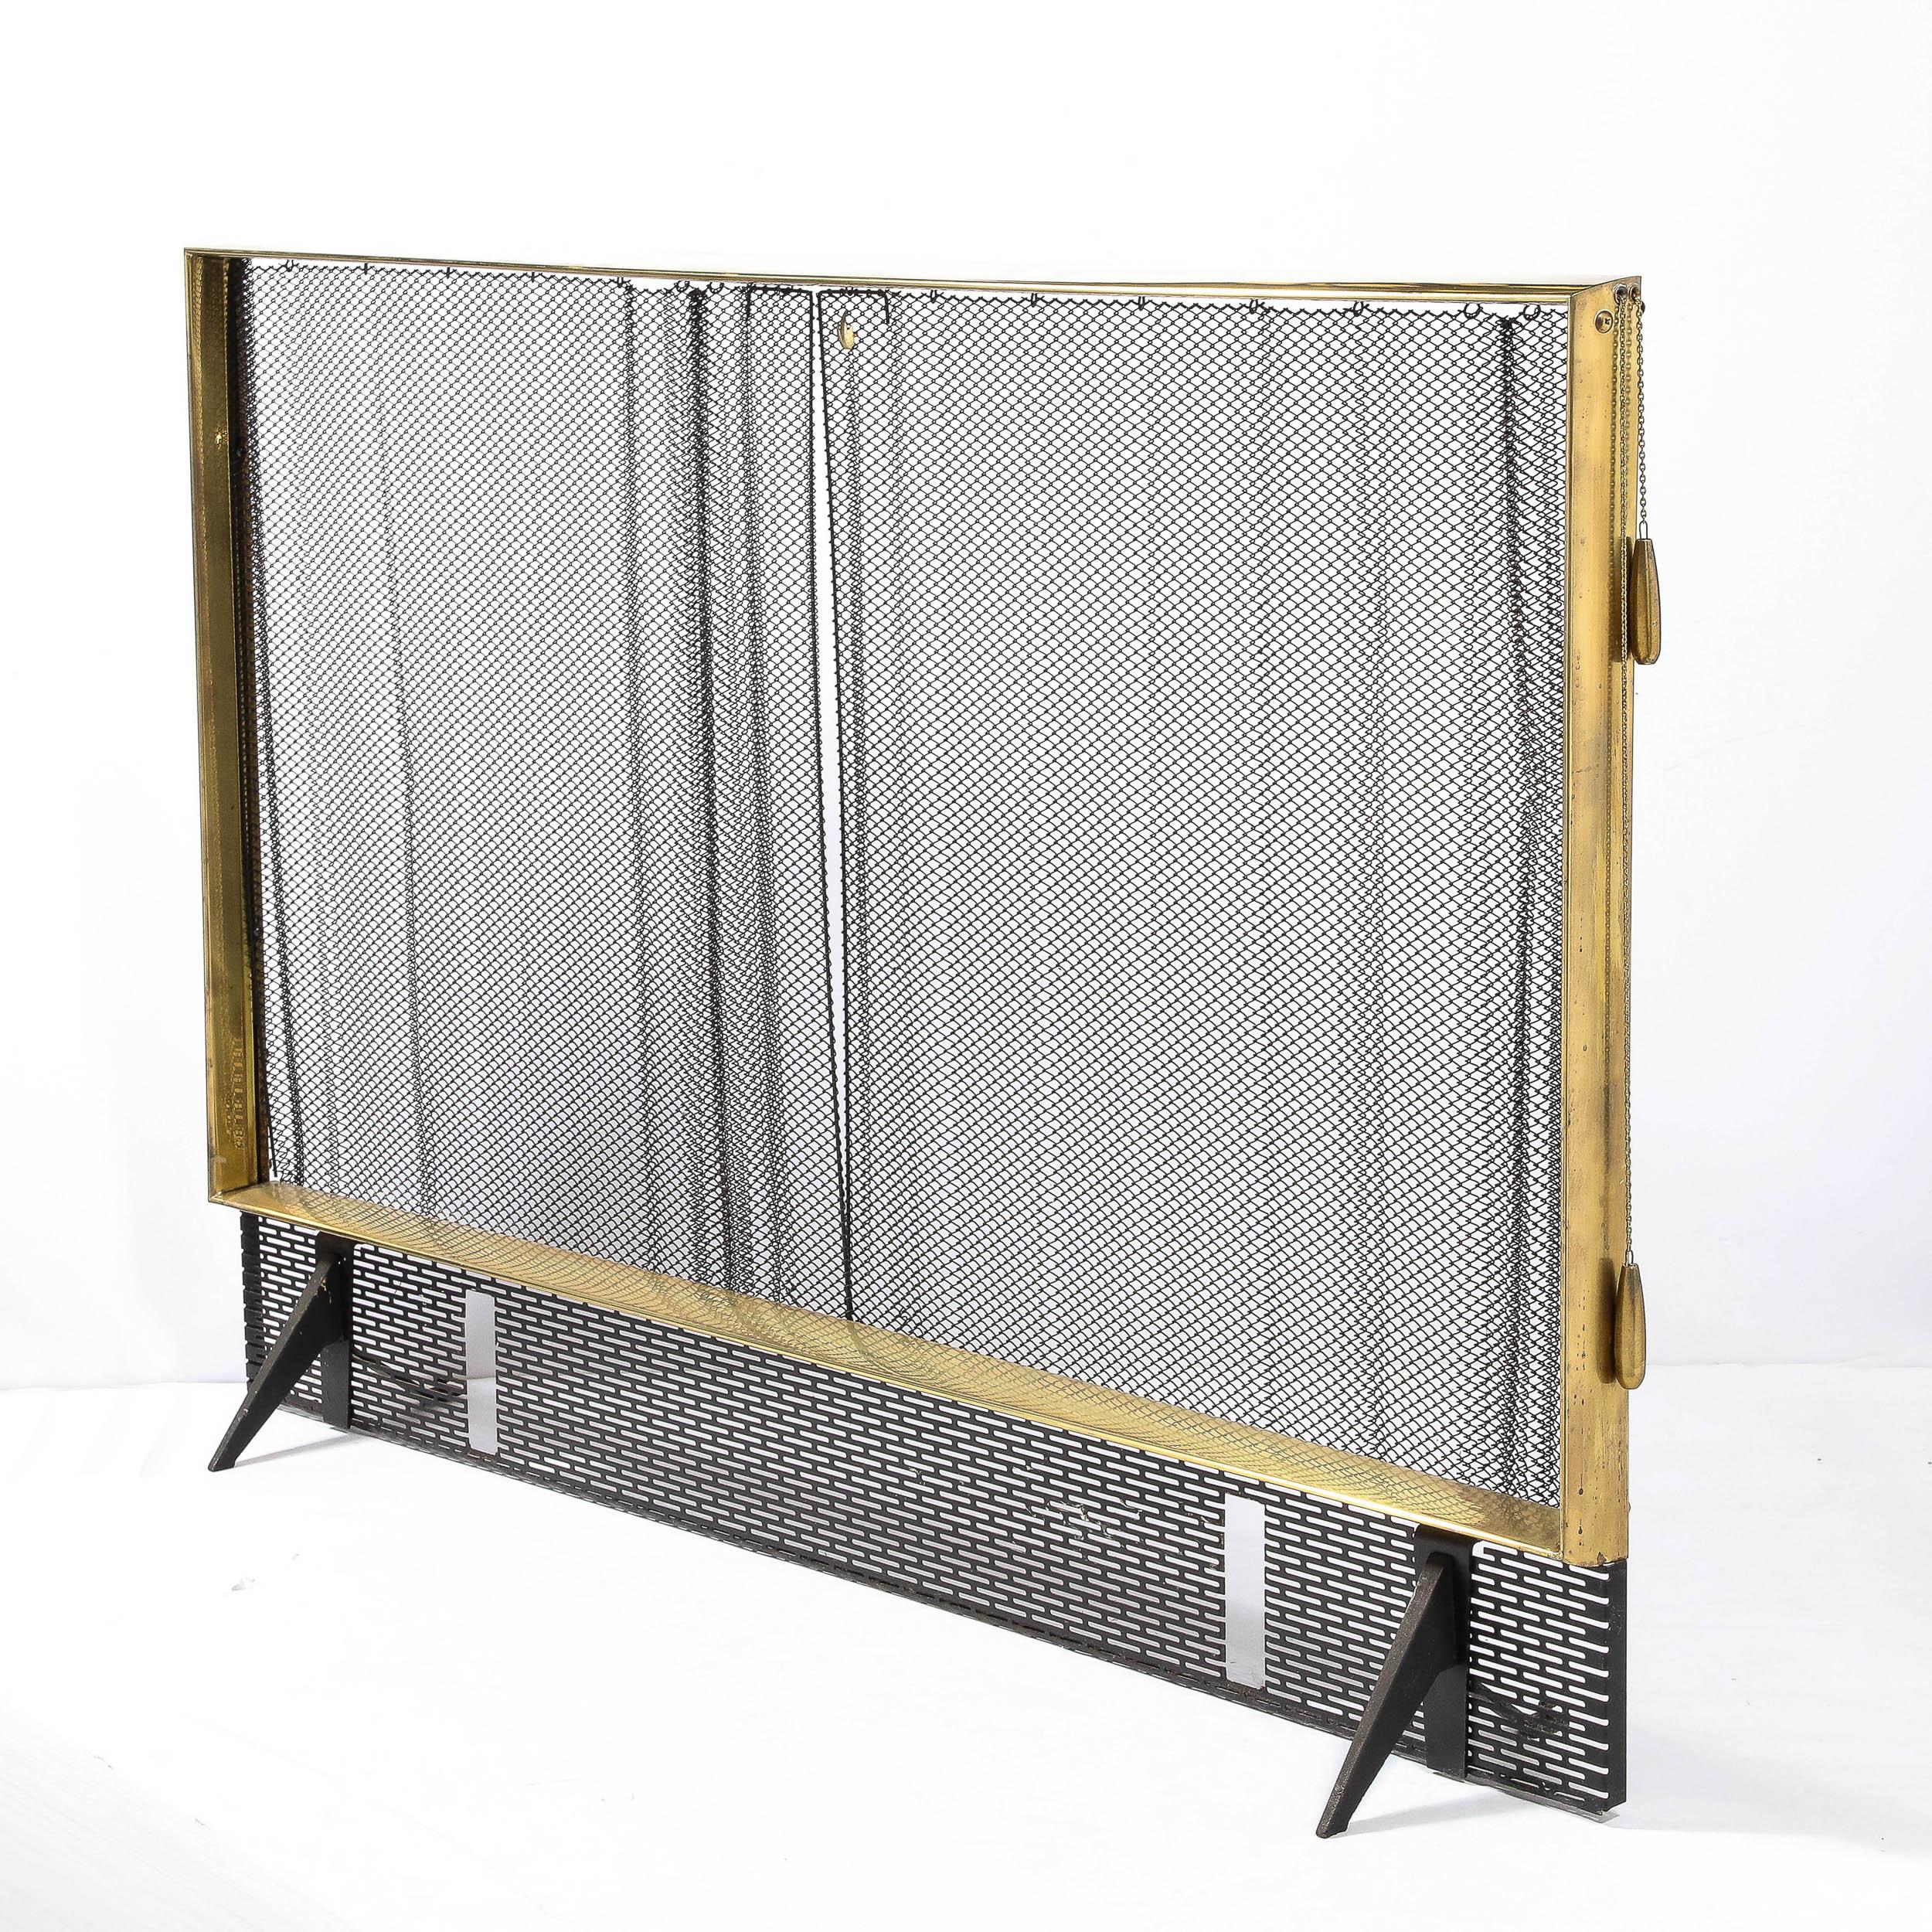 This elegant and important midcentury fire screen suite was realized by the legendary designer Donald Deskey- the visionary behind Radio City Music Hall- for Bennet in the United States, circa 1950. The fire screen offers an austere polished brass